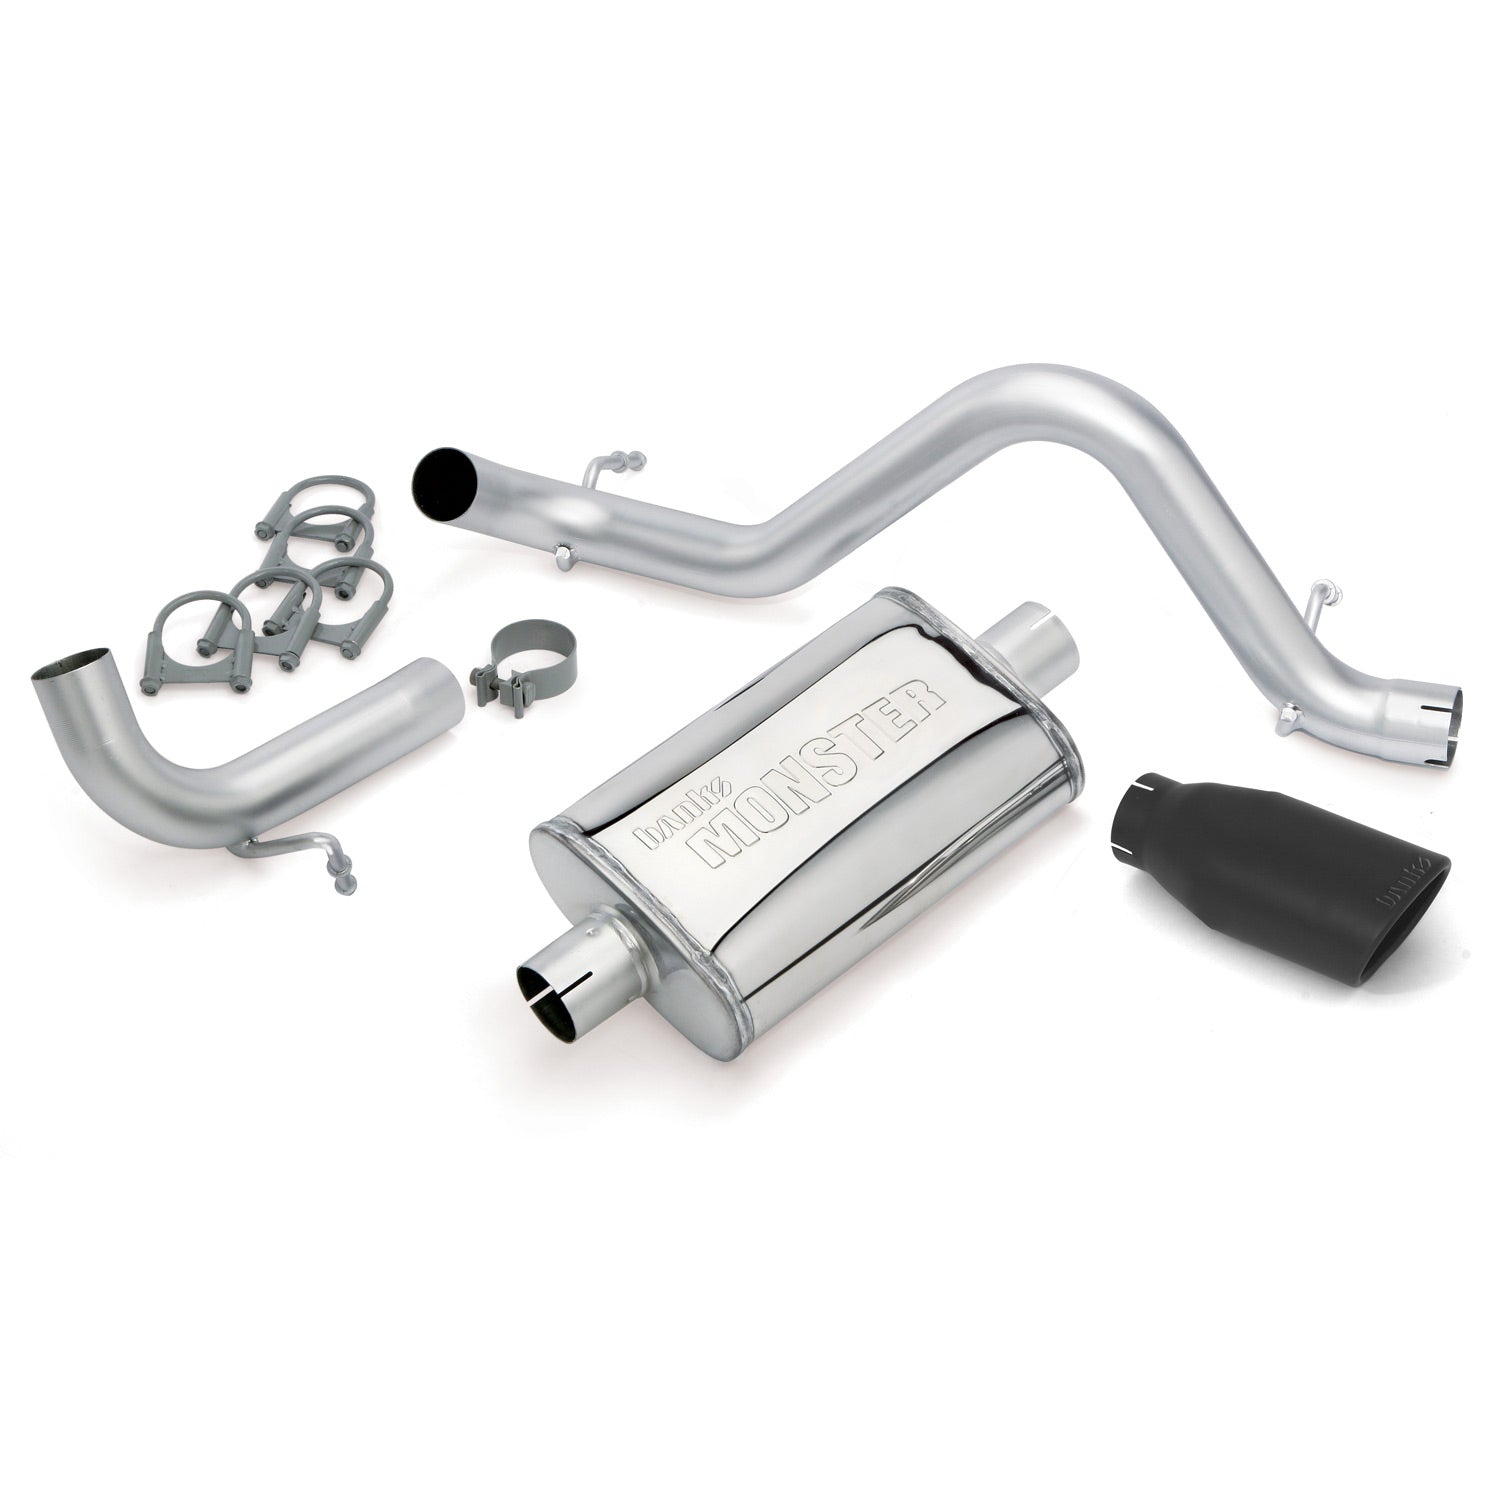 Jeep Performance Exhaust Systems and Upgrade Kits - Banks